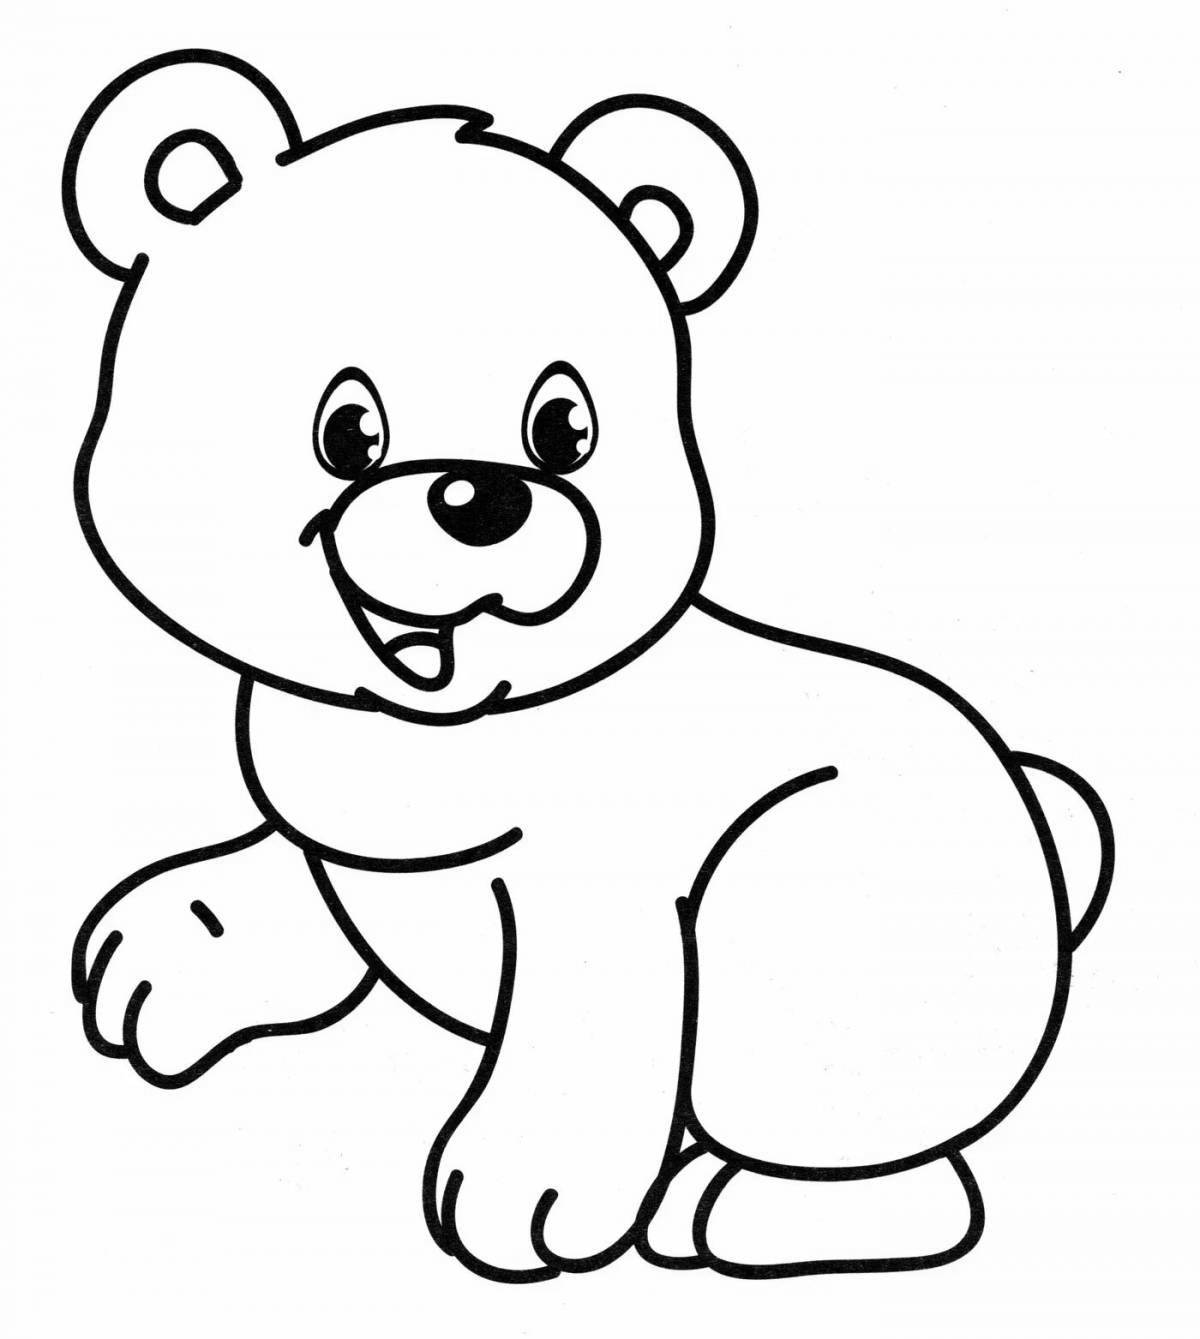 Friendly bear coloring pages